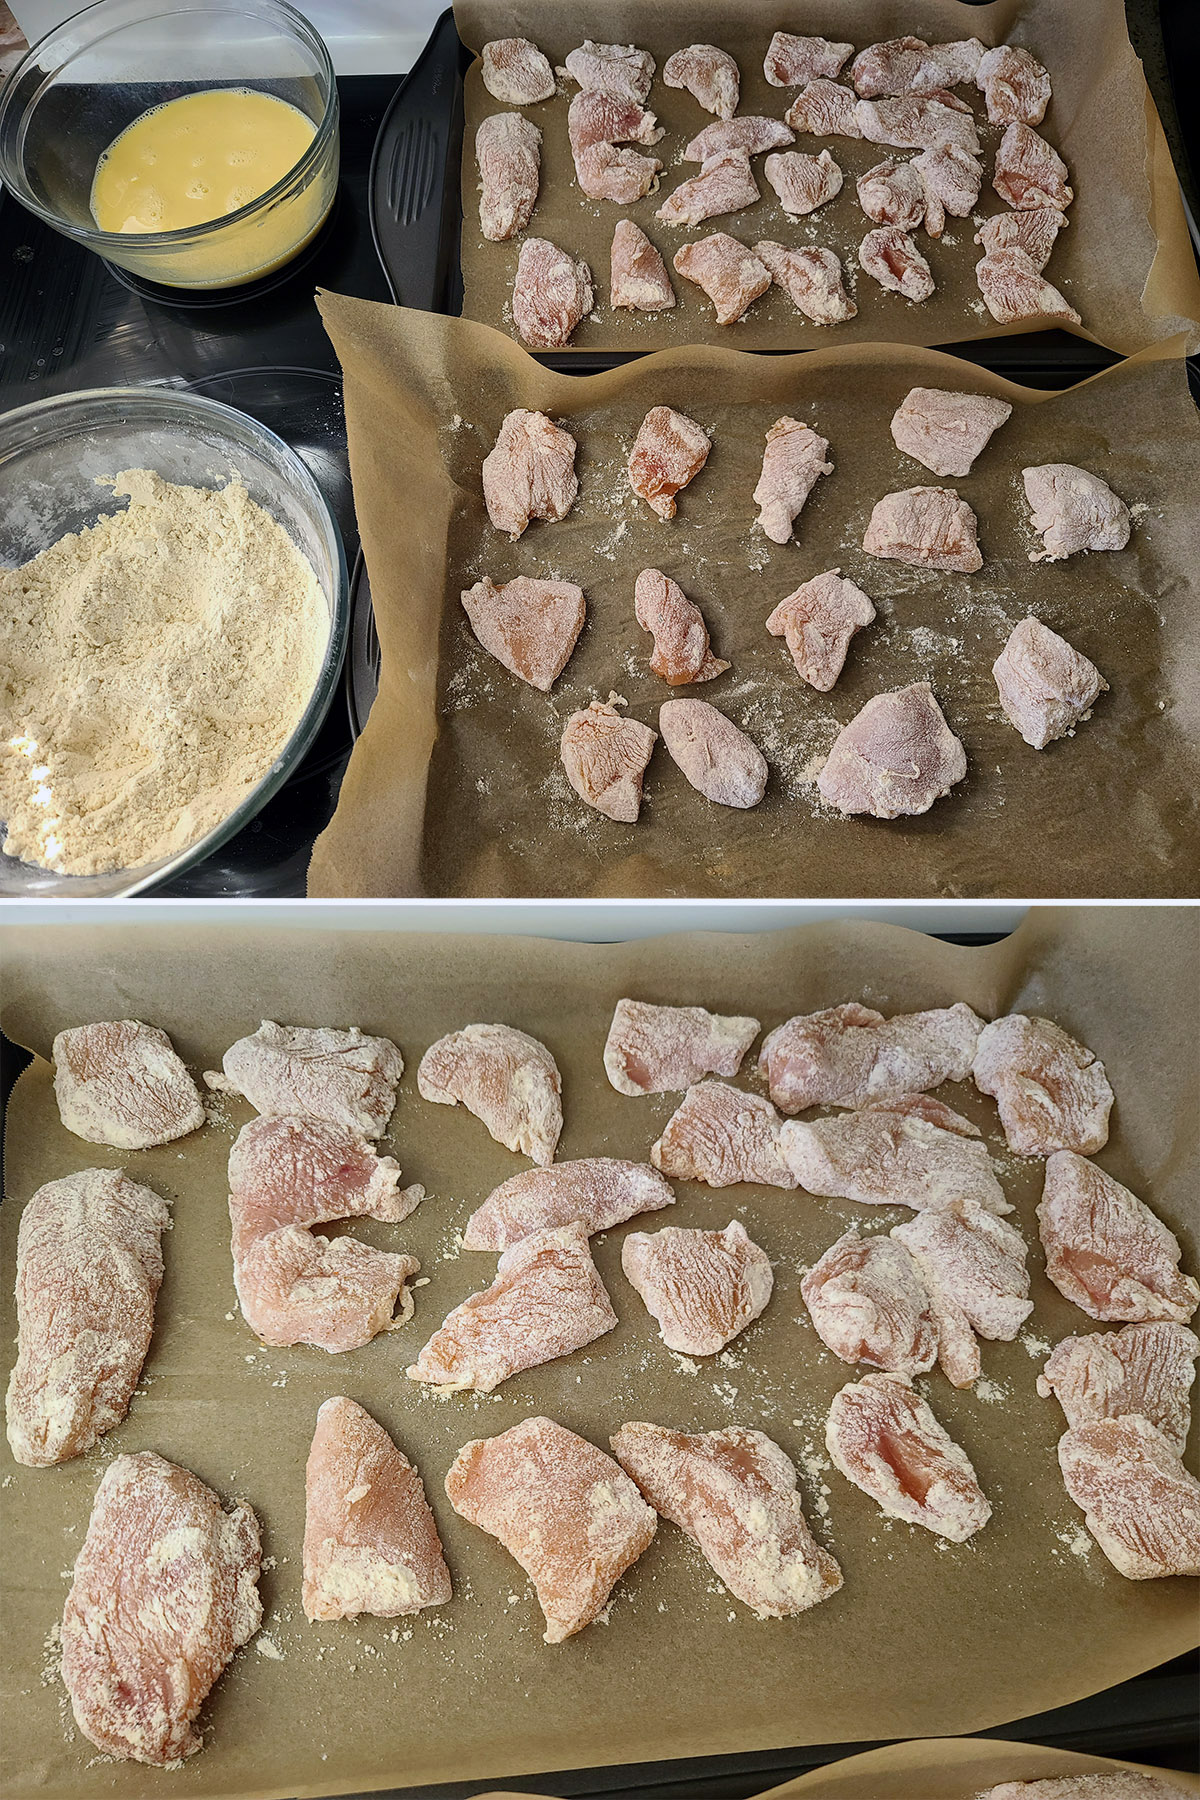 A 2 part image showing the chicken pieces dredged in dry mix.